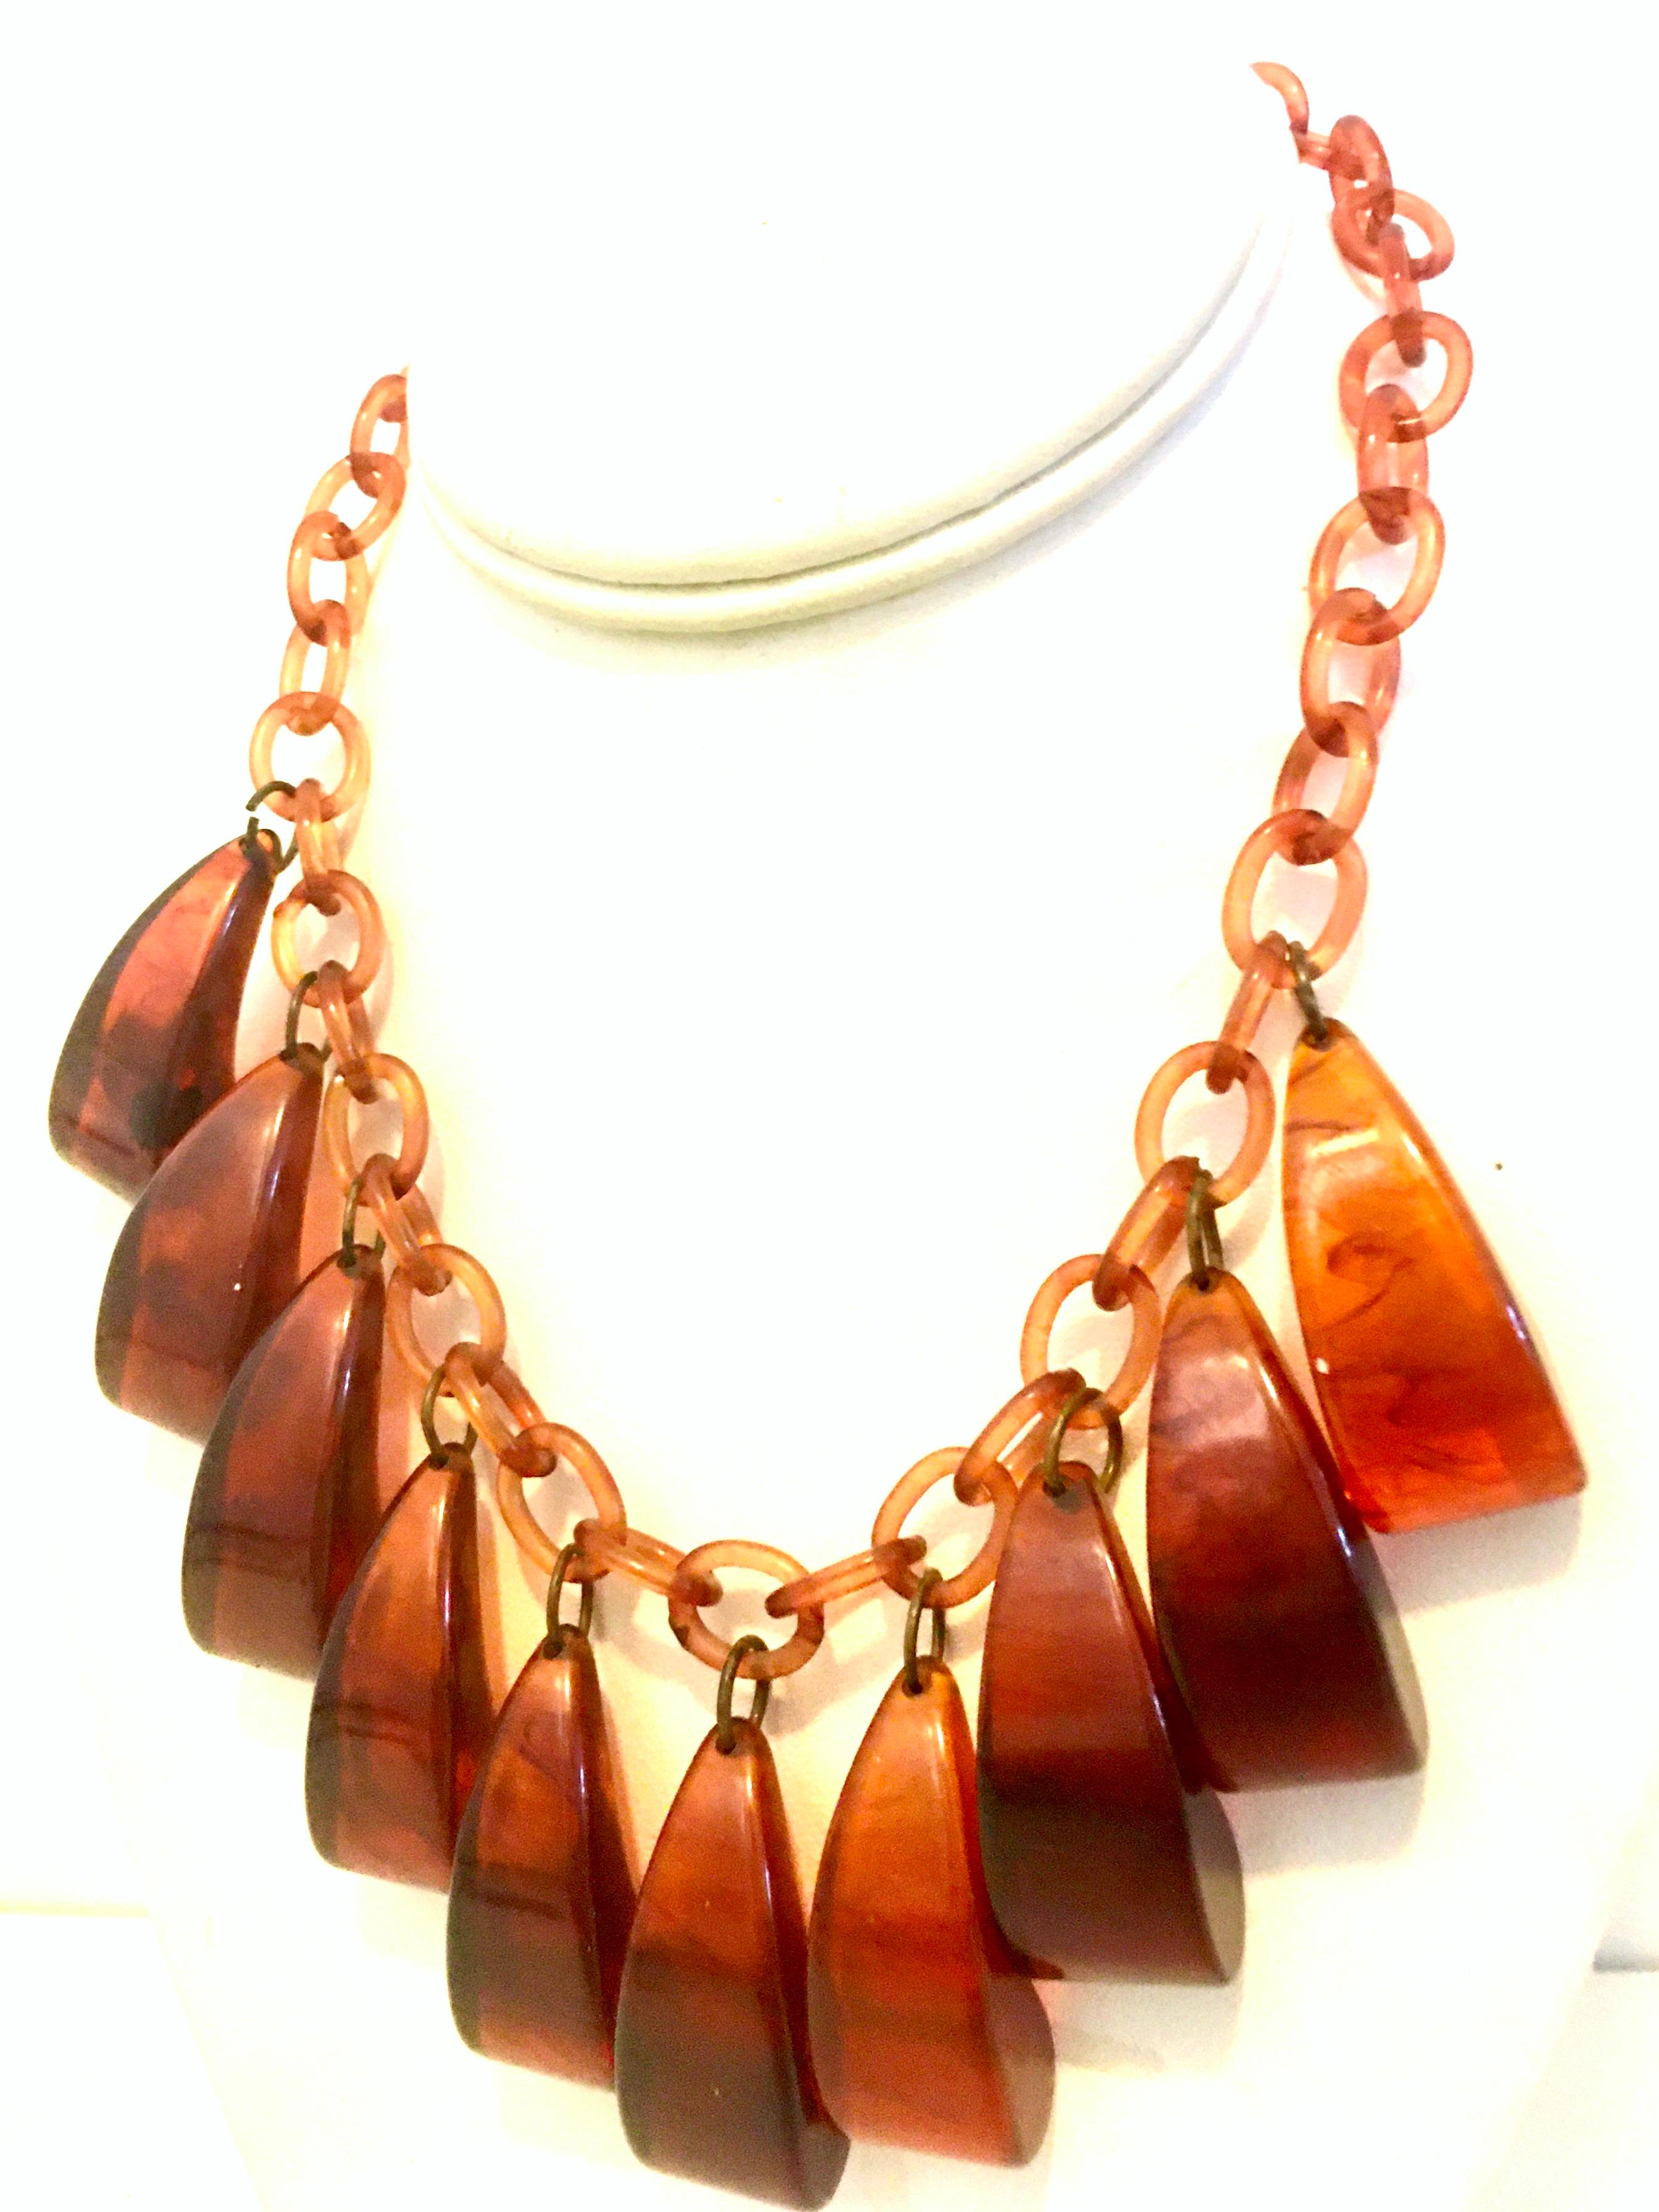 Mid-20th Century Art Deco Root Beer Bakelite & Celluloid Chain Link Necklace. This coveted and rare choker style necklace features Celluloid chain link detail with 10 large organic form hanging charm ornaments. The locking claps is brass. Each of